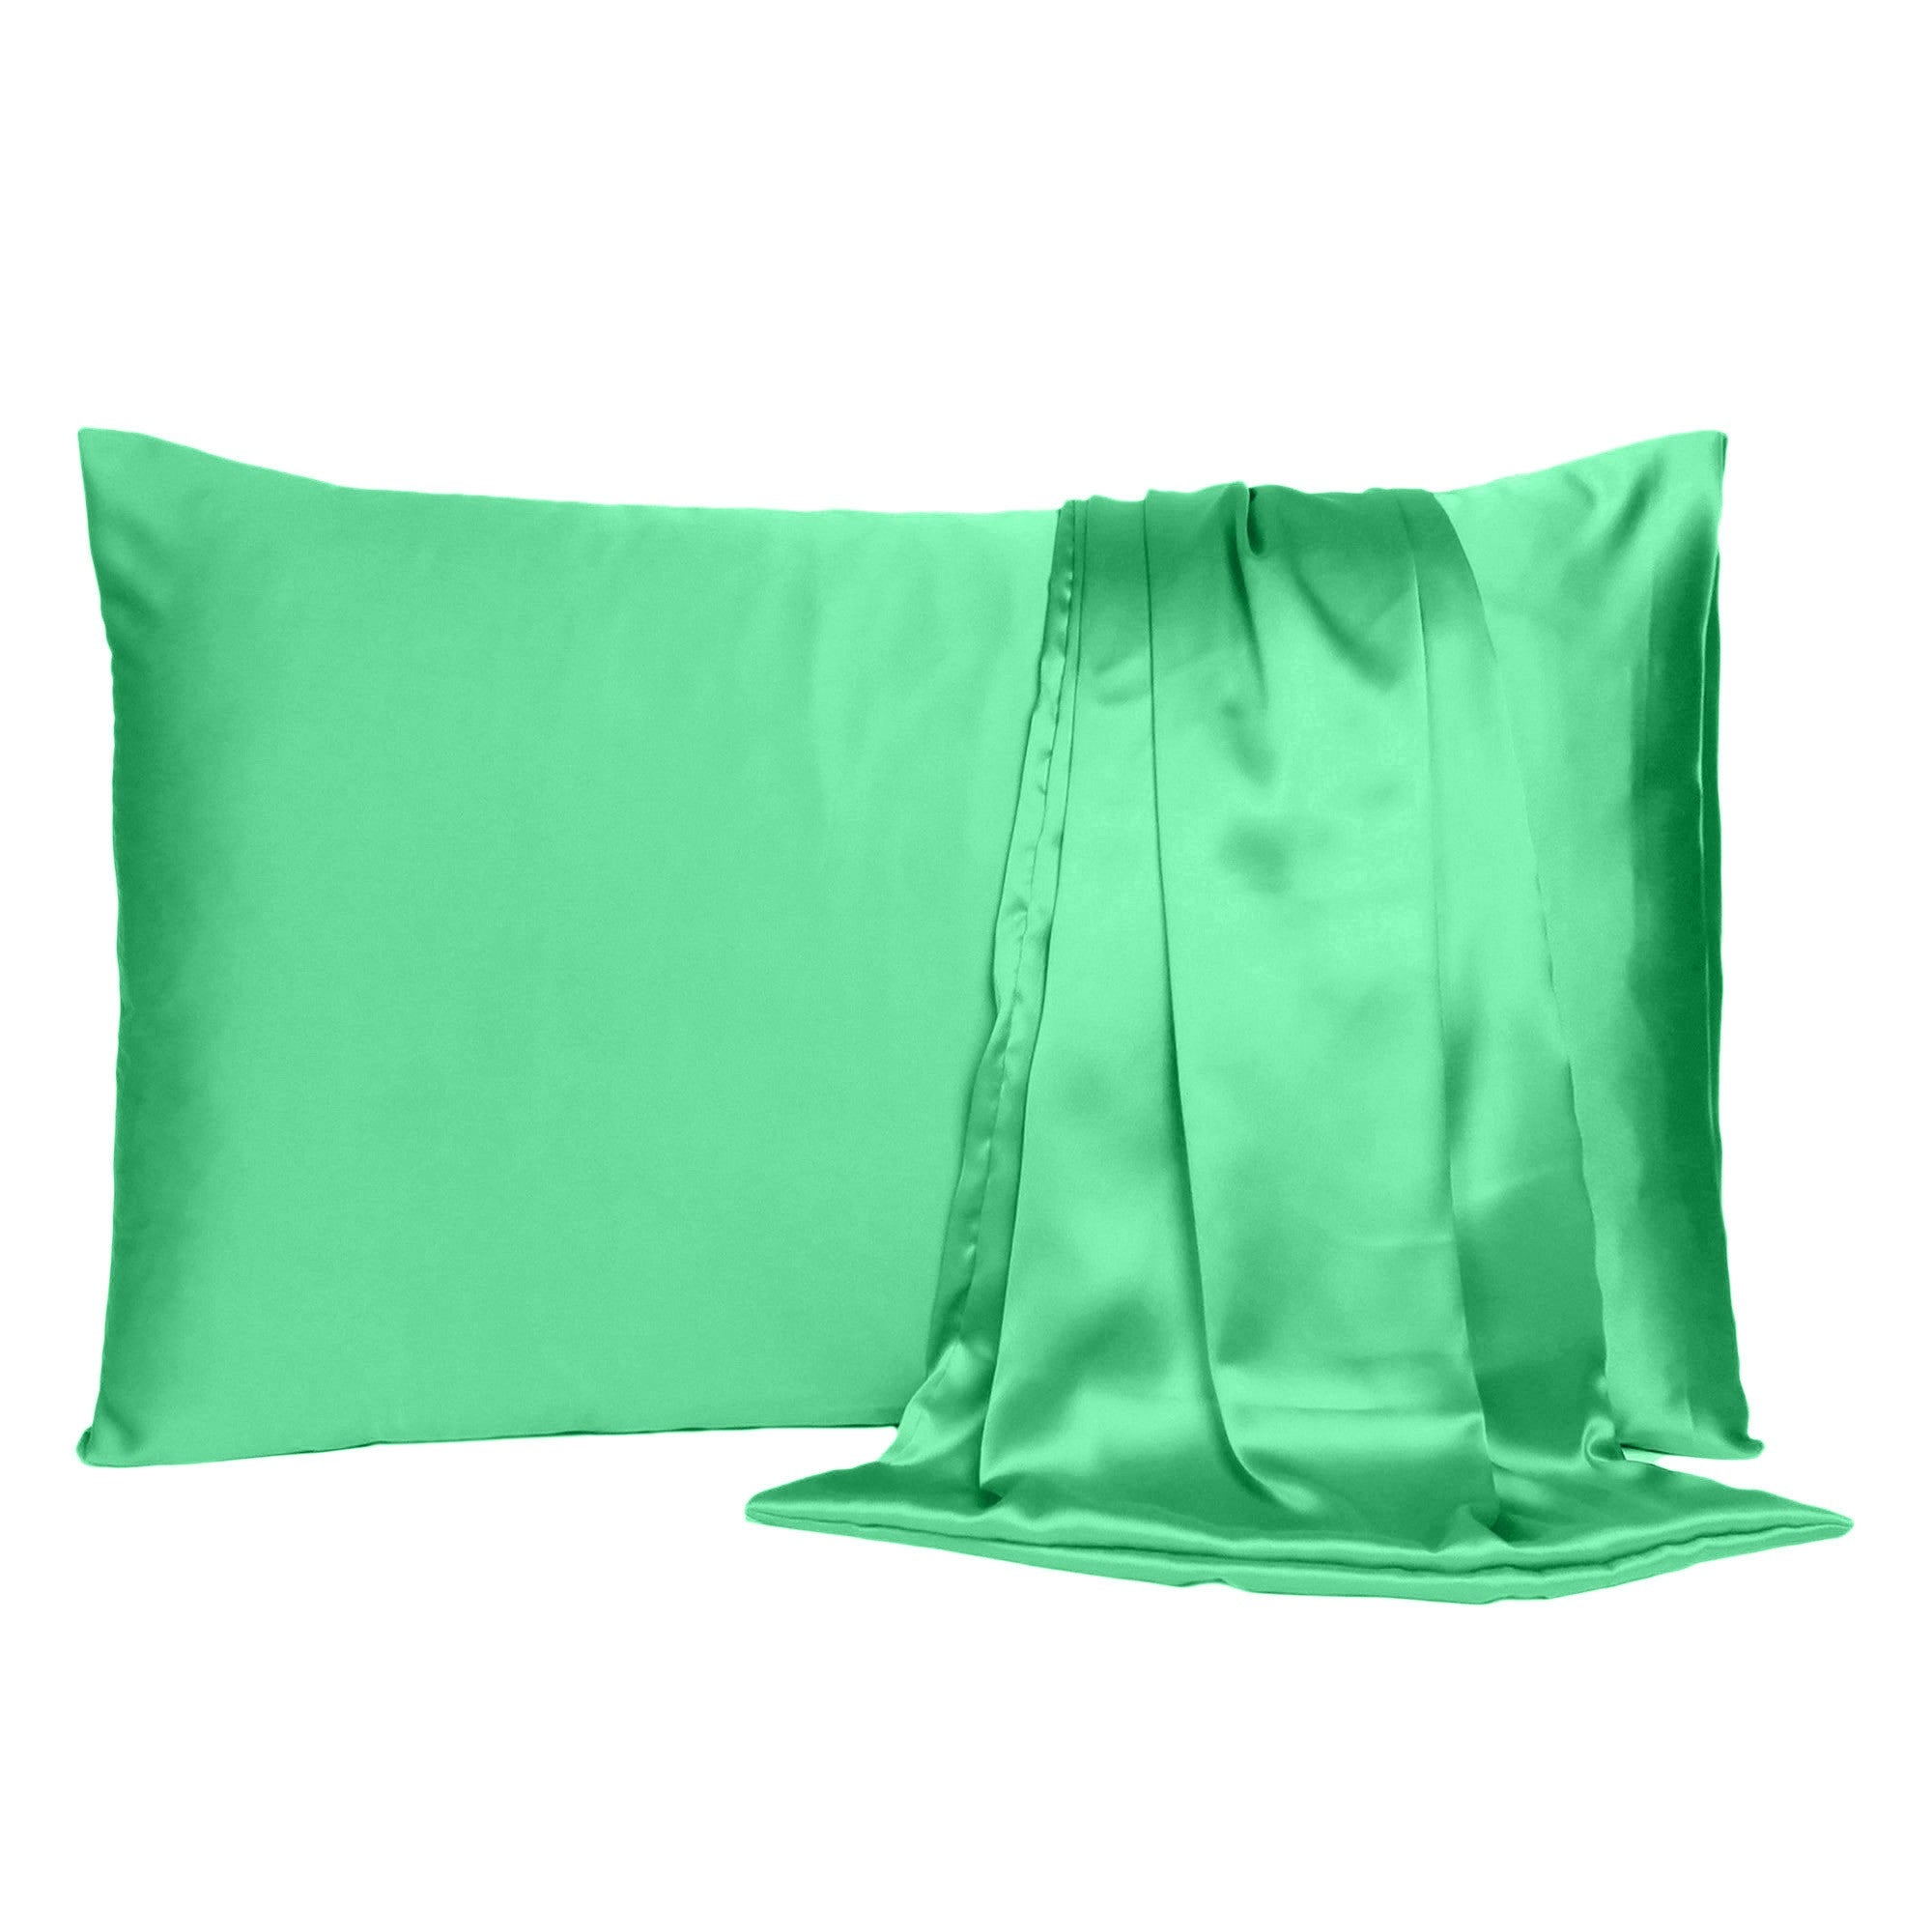 Green Dreamy Set Of 2 Silky Satin Standard Pillowcases - Tuesday Morning-Bed Sheets